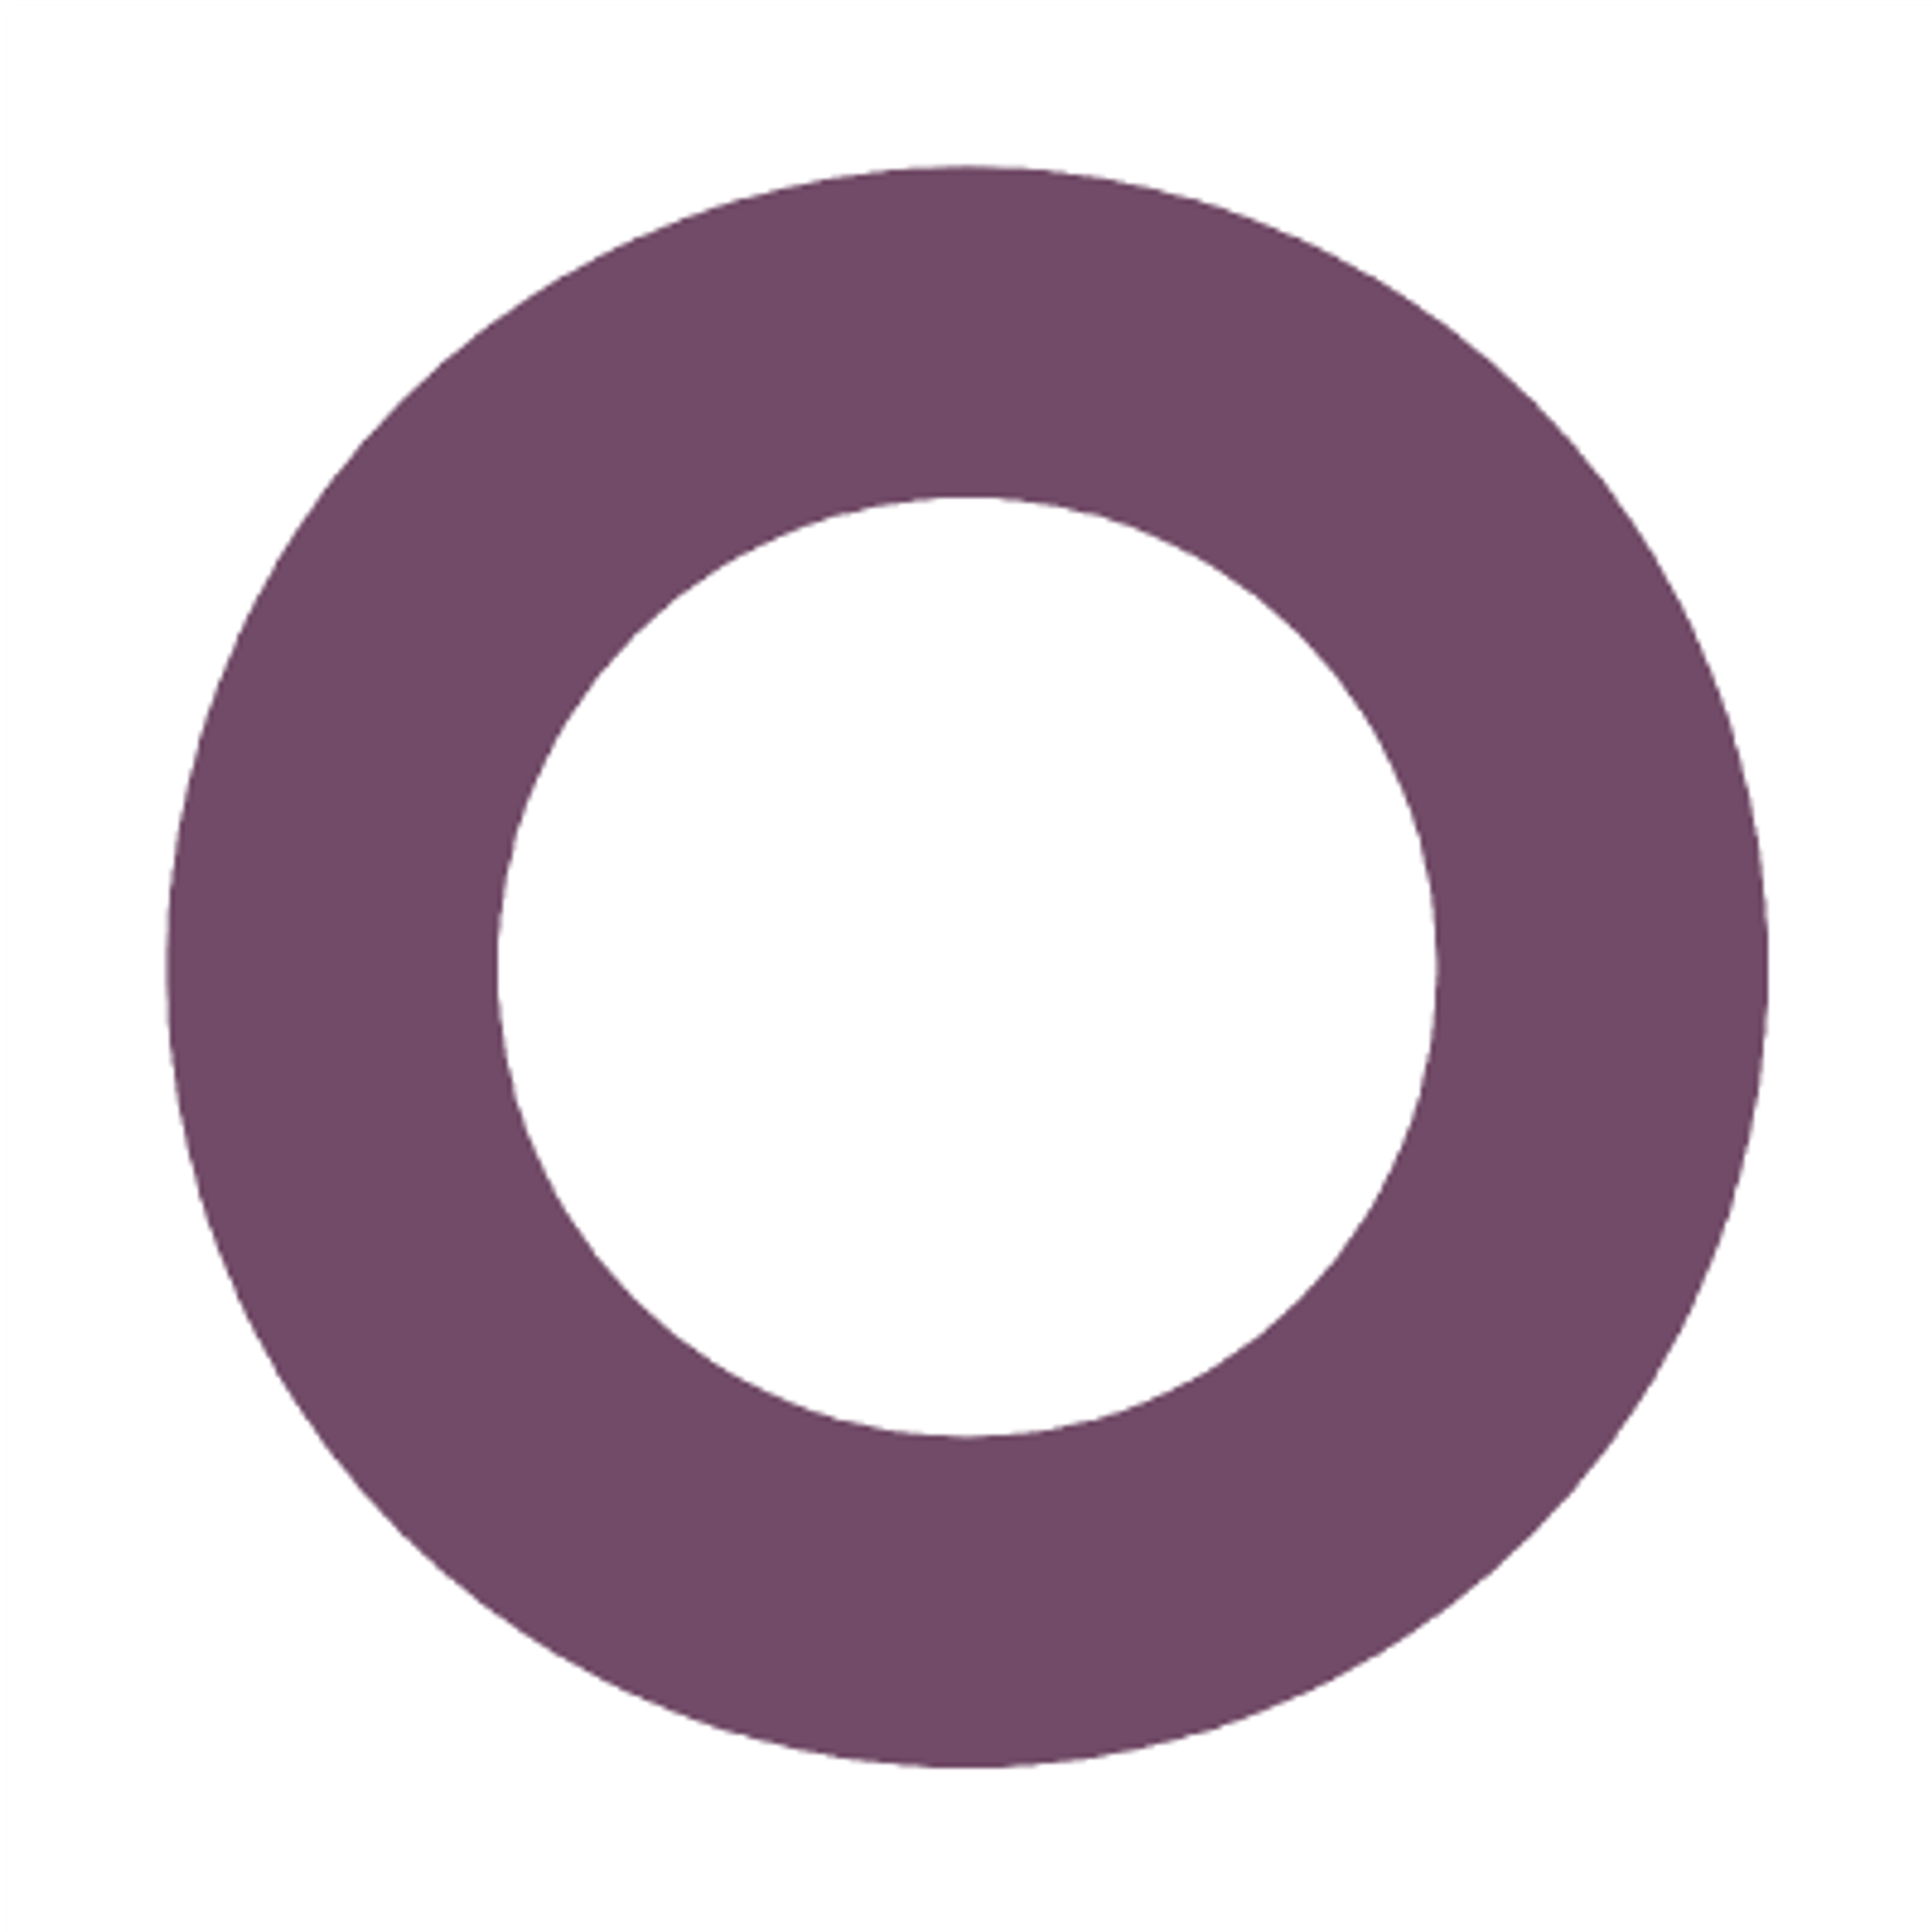 [MERGE] core: introduce mechanism for `selection_add` cleanup by Elkasitu · Pull Request #46325 · odoo/odoo